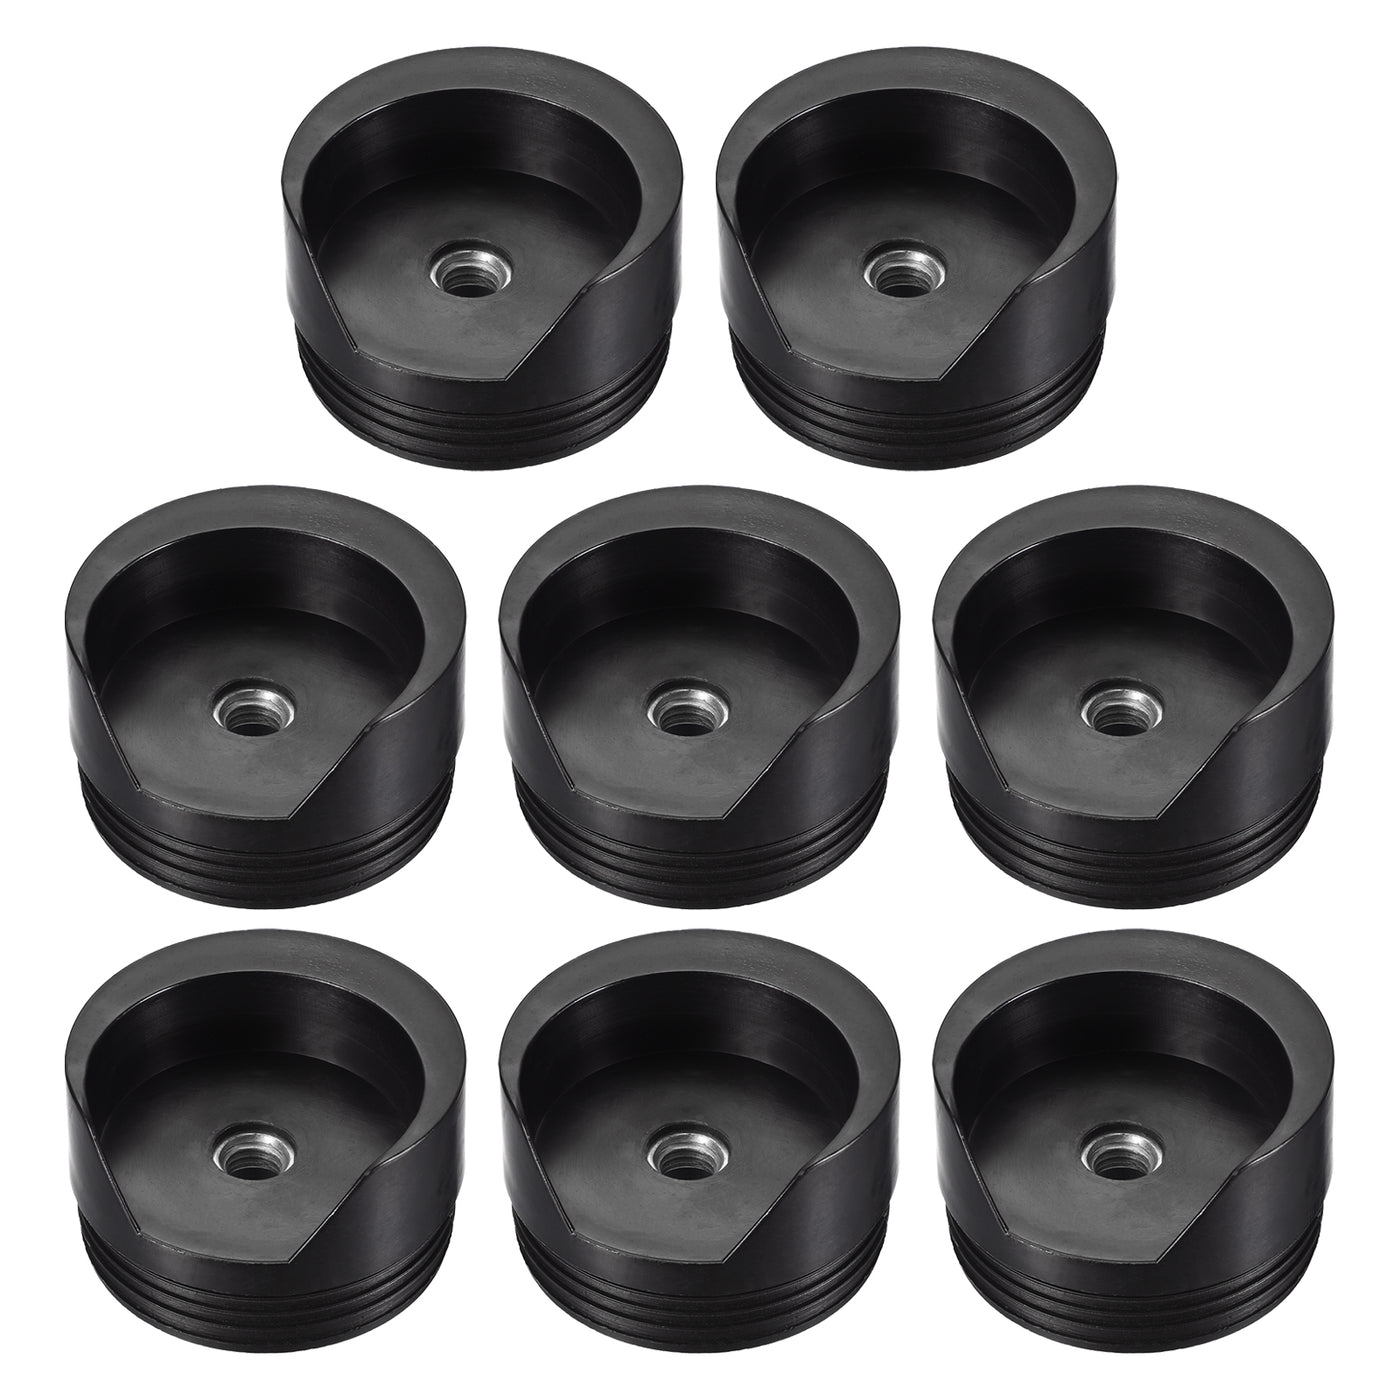 uxcell Uxcell 8Pcs 76mm/2.99" Caster Insert with Thread, Round M12 Thread for Furniture